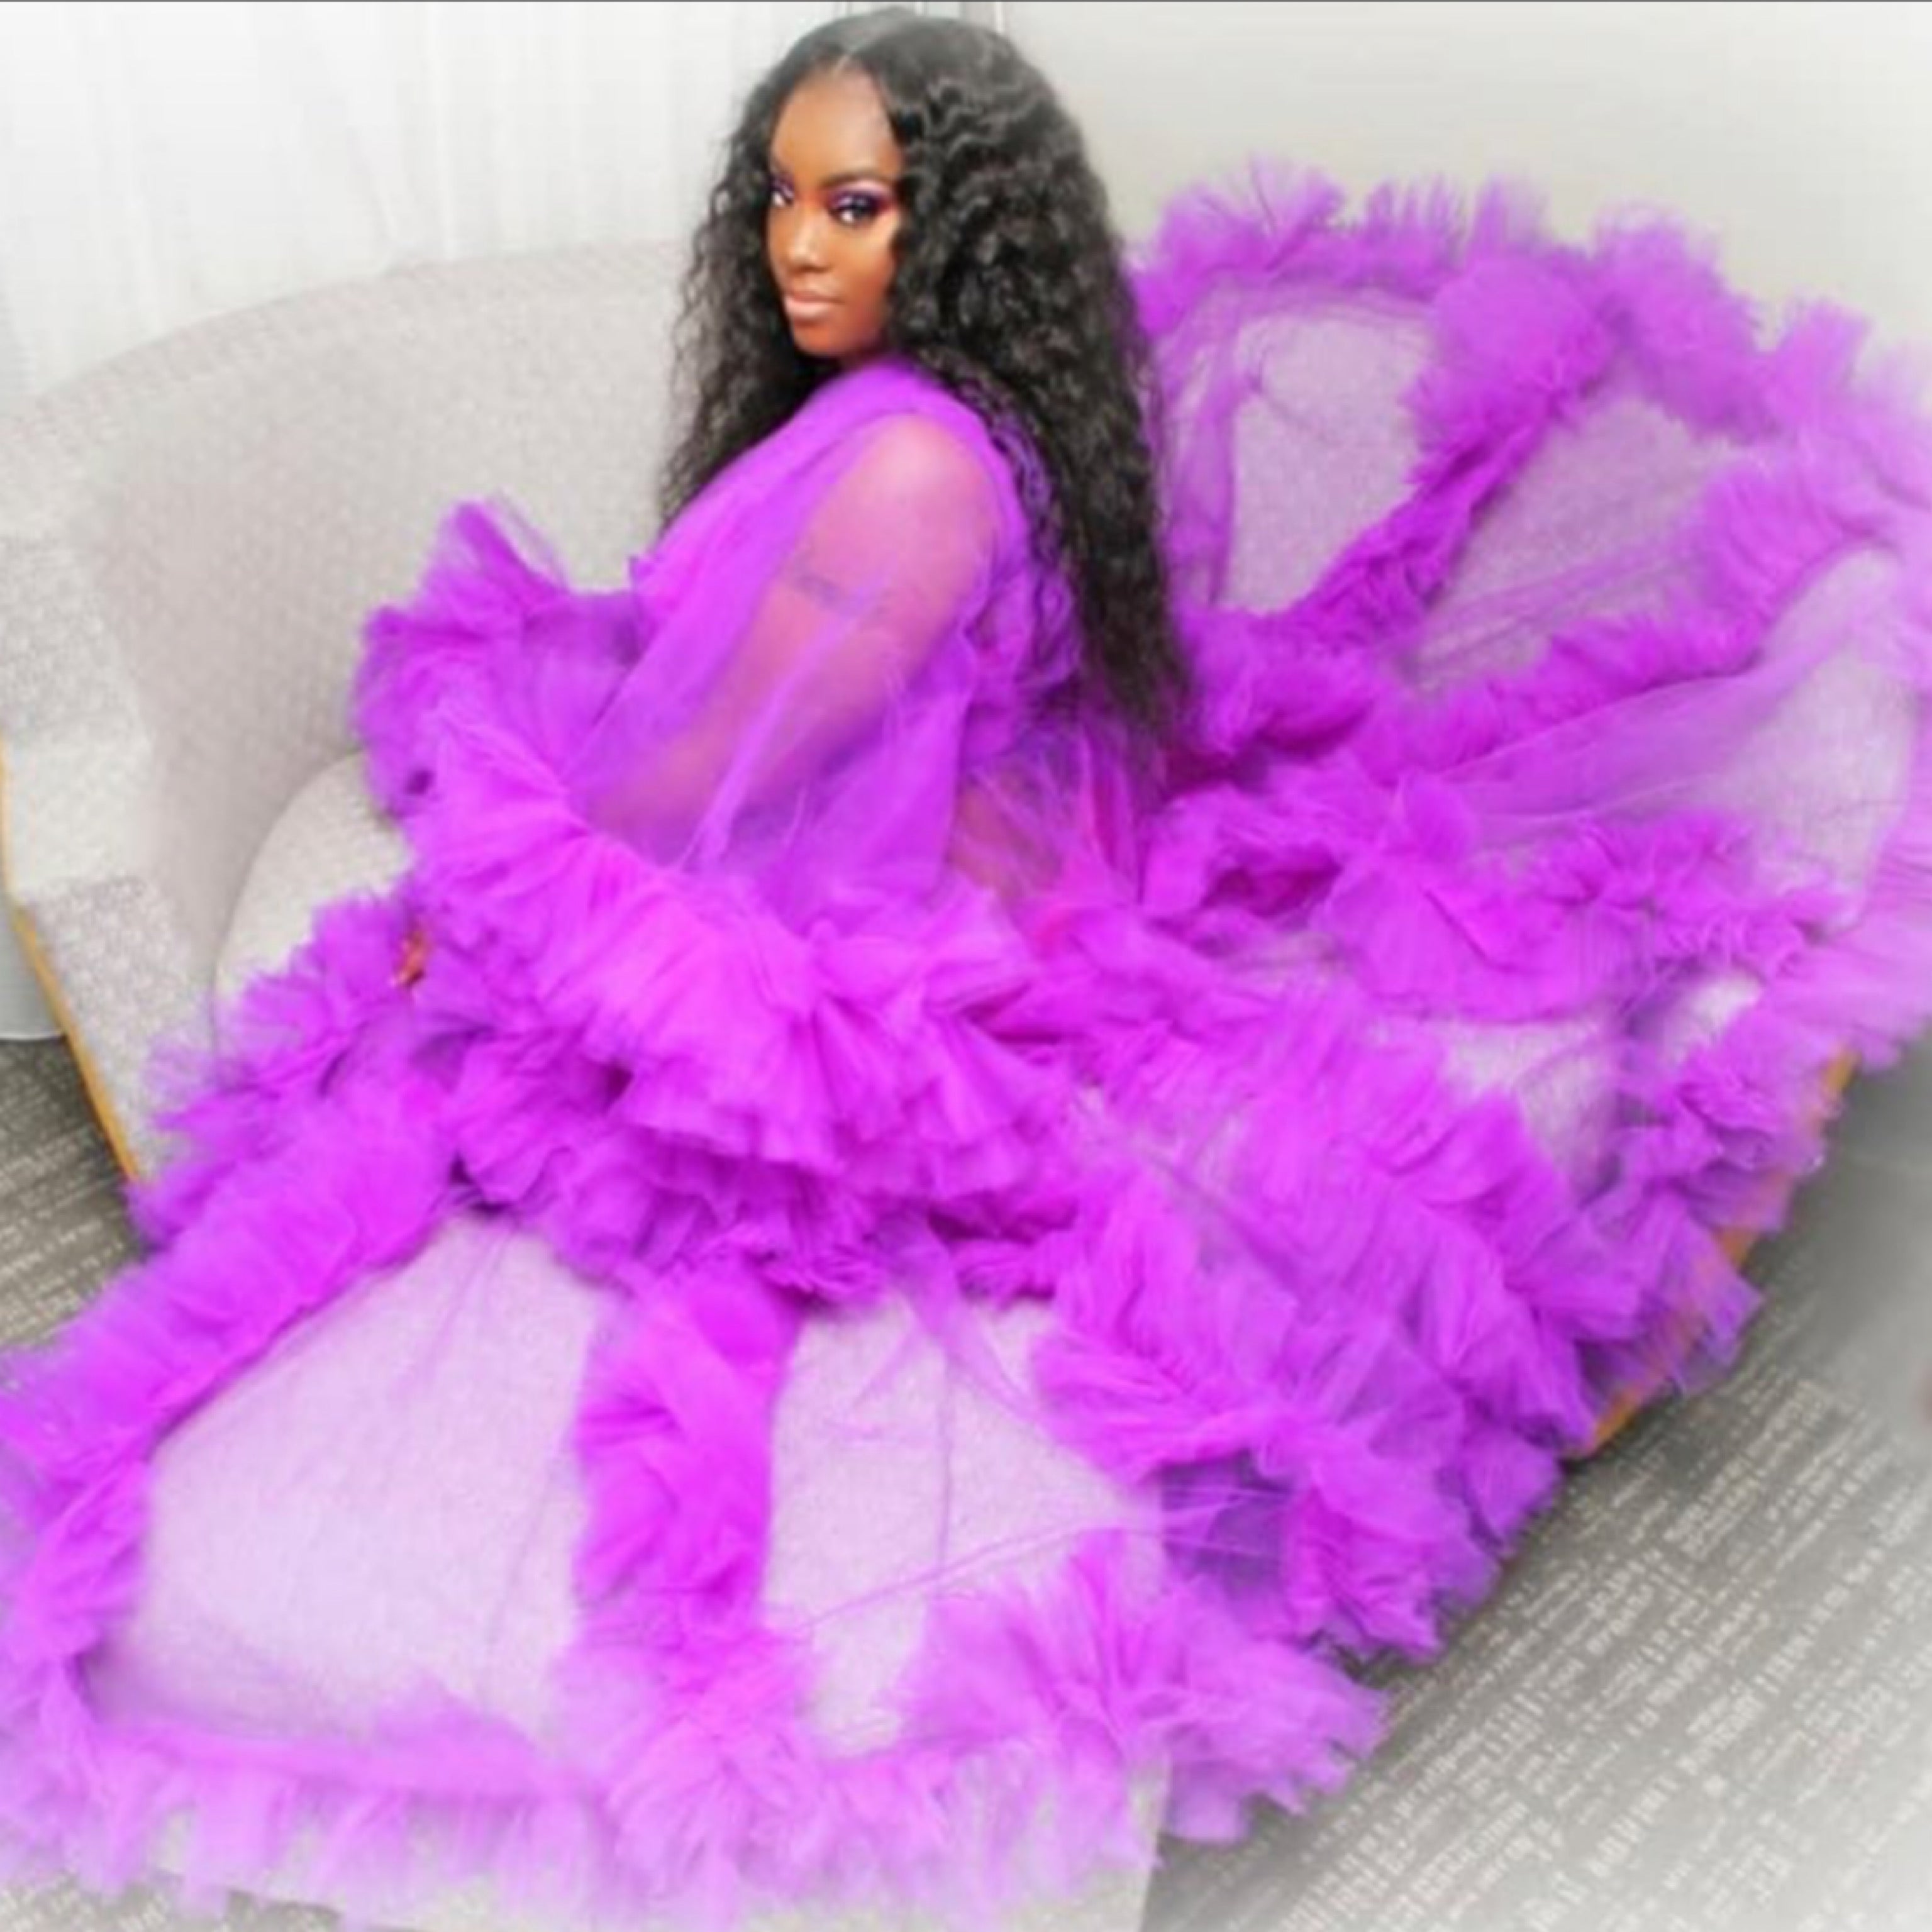 "Her Majesty" Long Fluffy Ruffled Tulle Robe